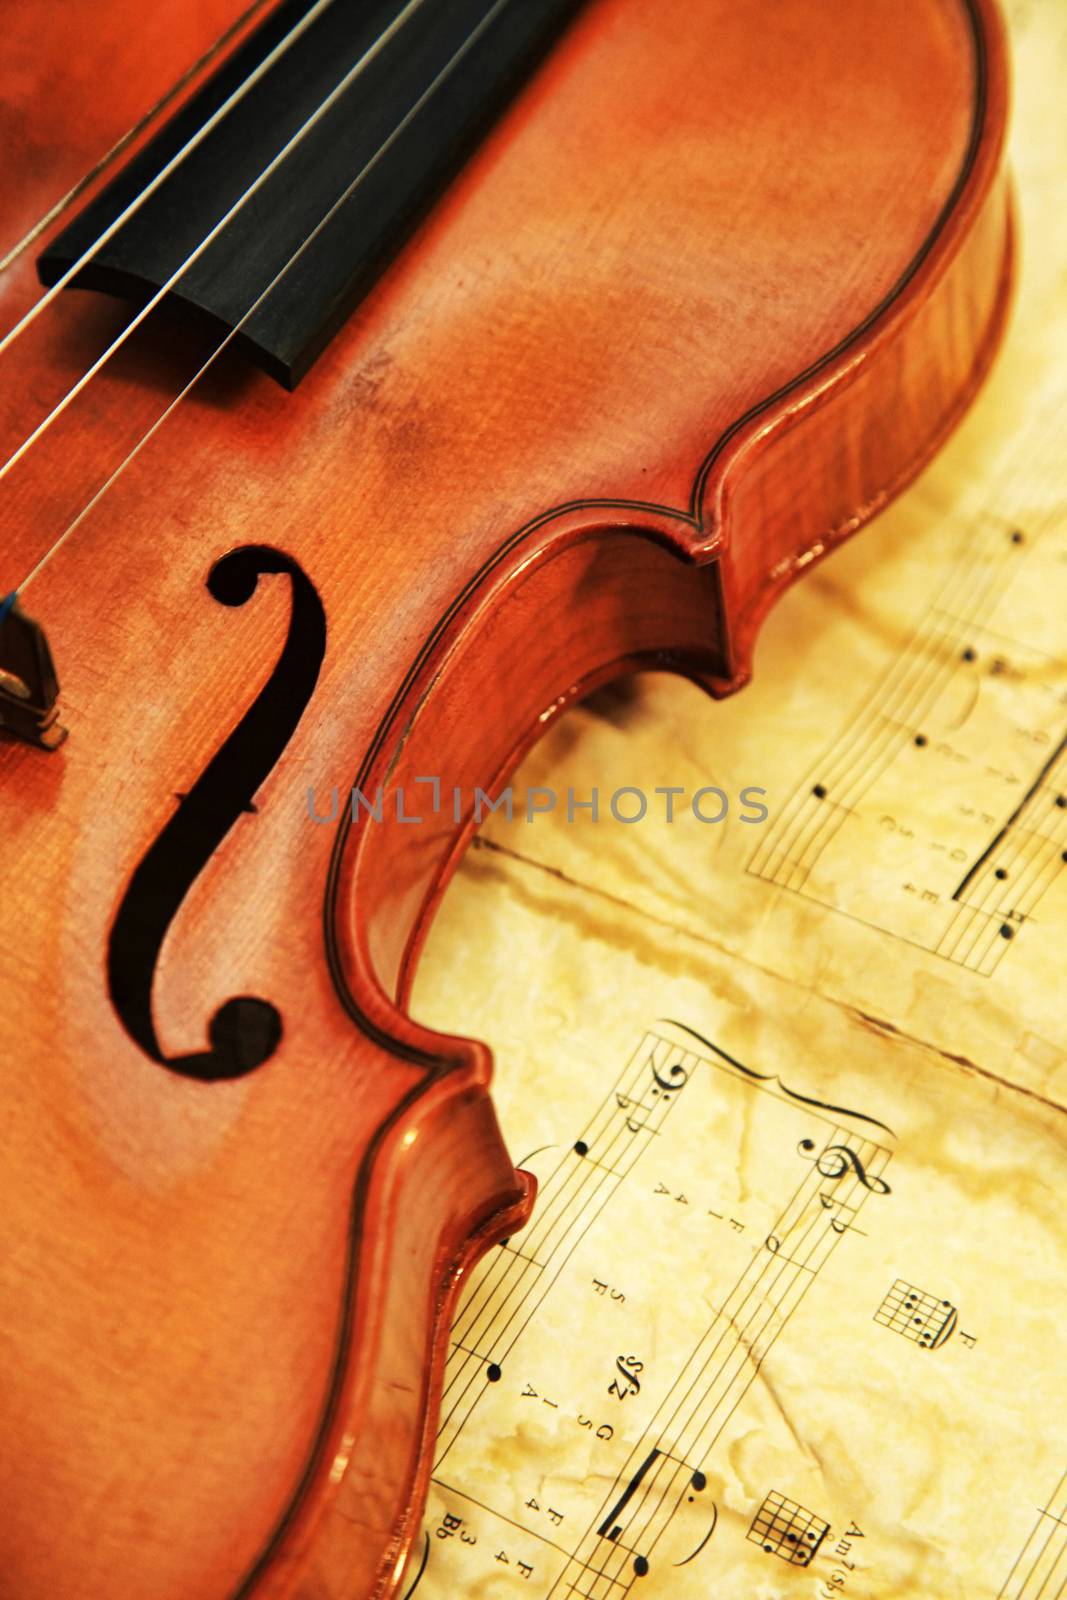 1937 old violin on the background of notes